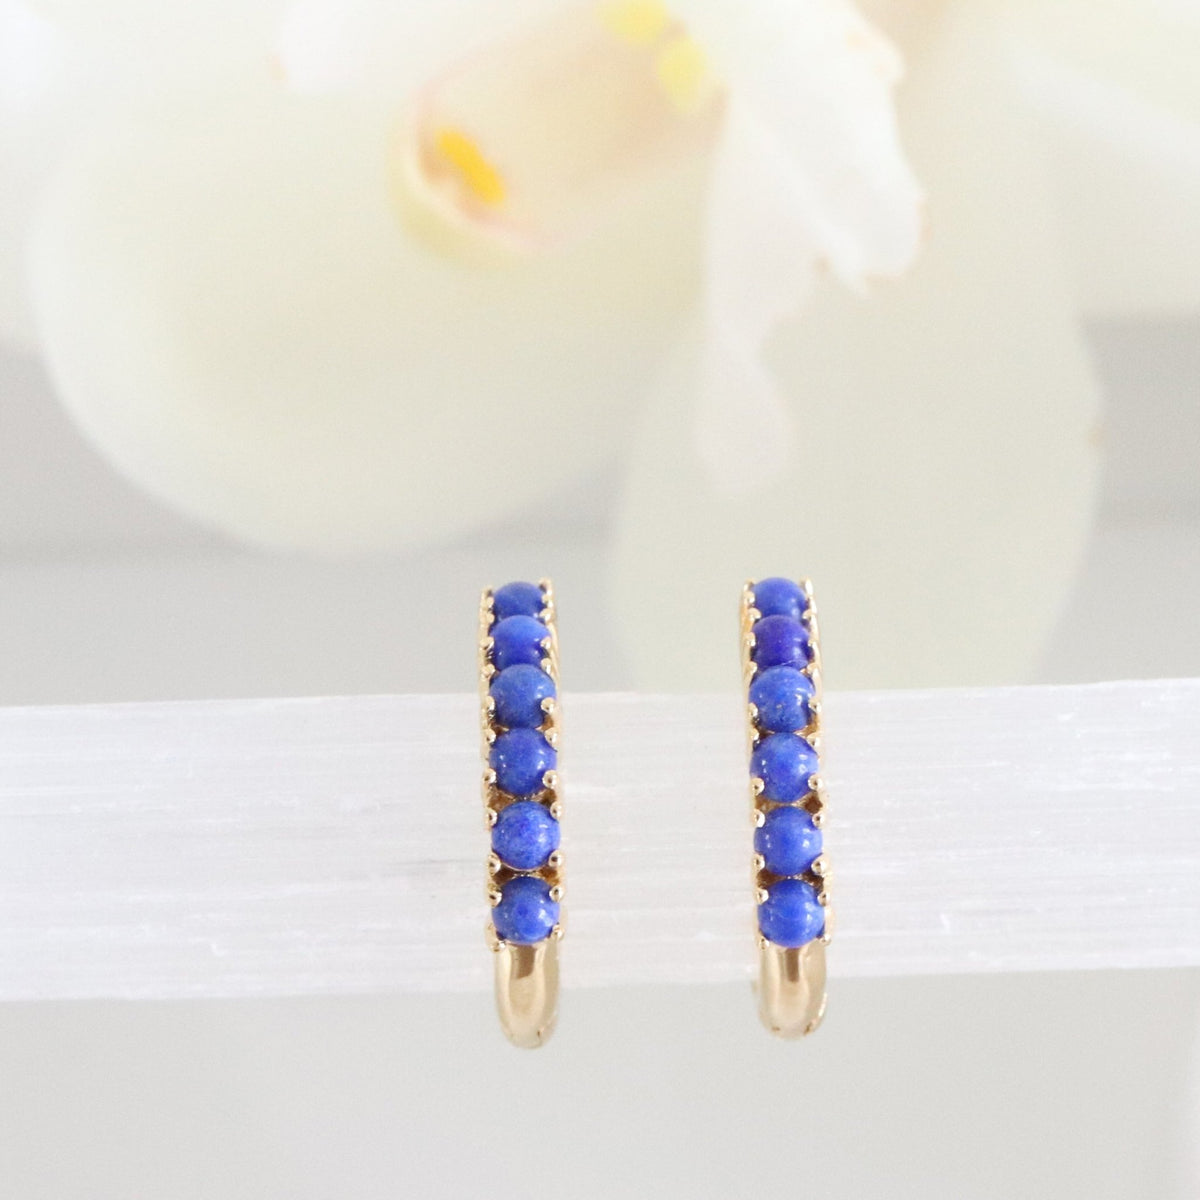 GLEE HUGGIE HOOPS - LAPIS &amp; GOLD - SO PRETTY CARA COTTER